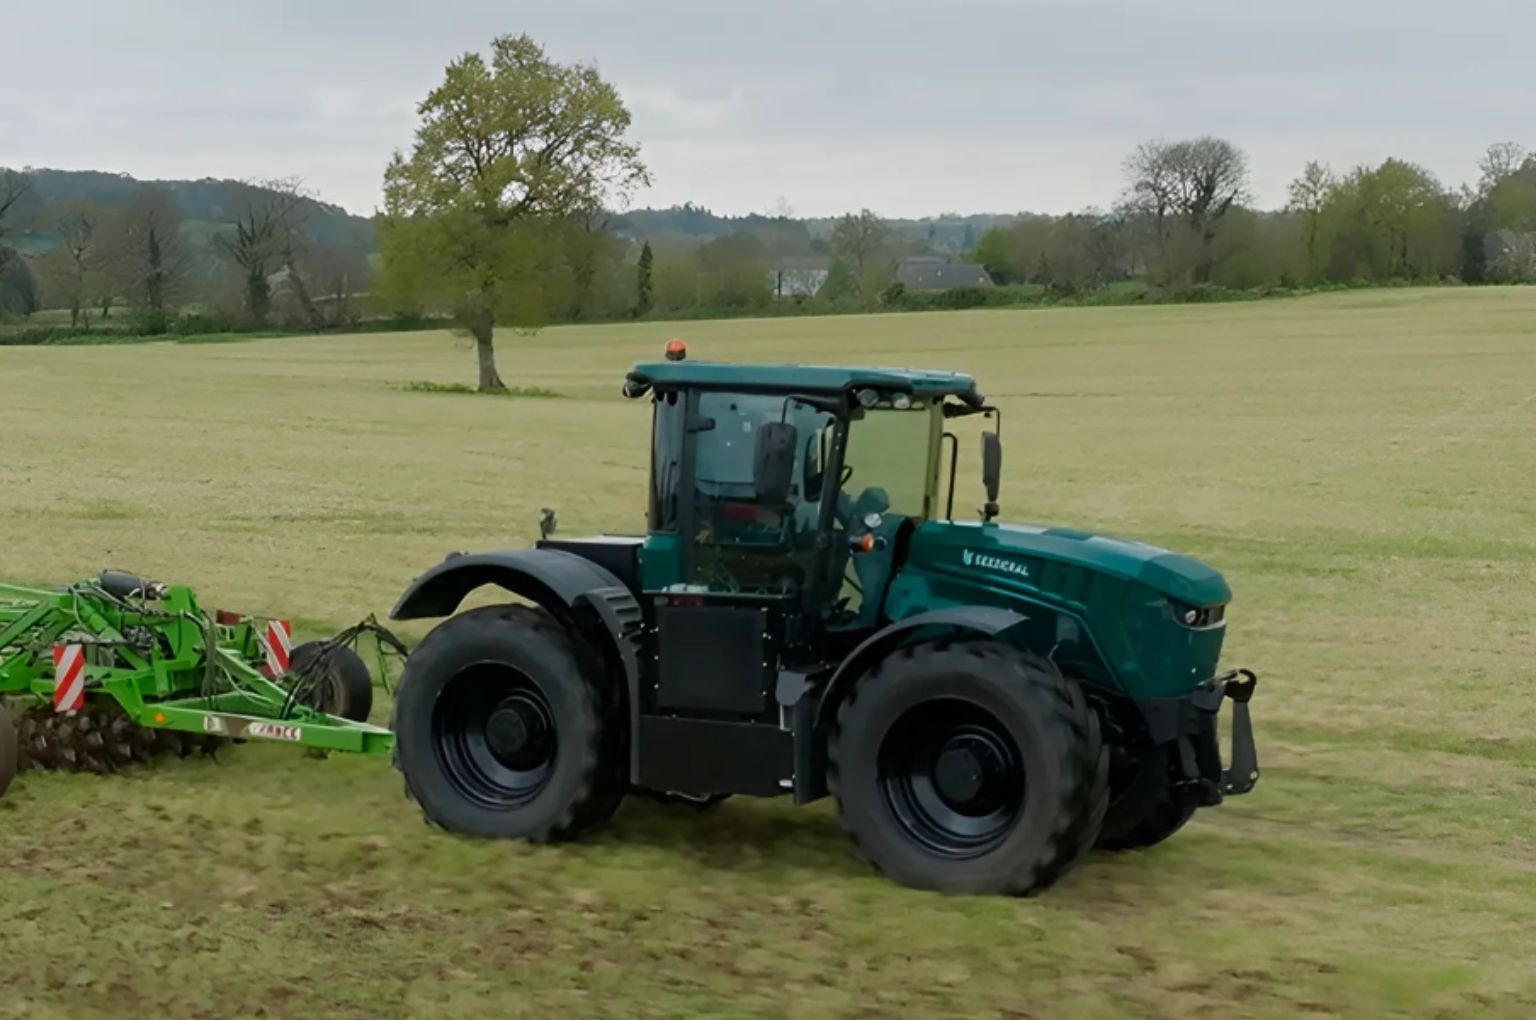 Major funding for electric tractor